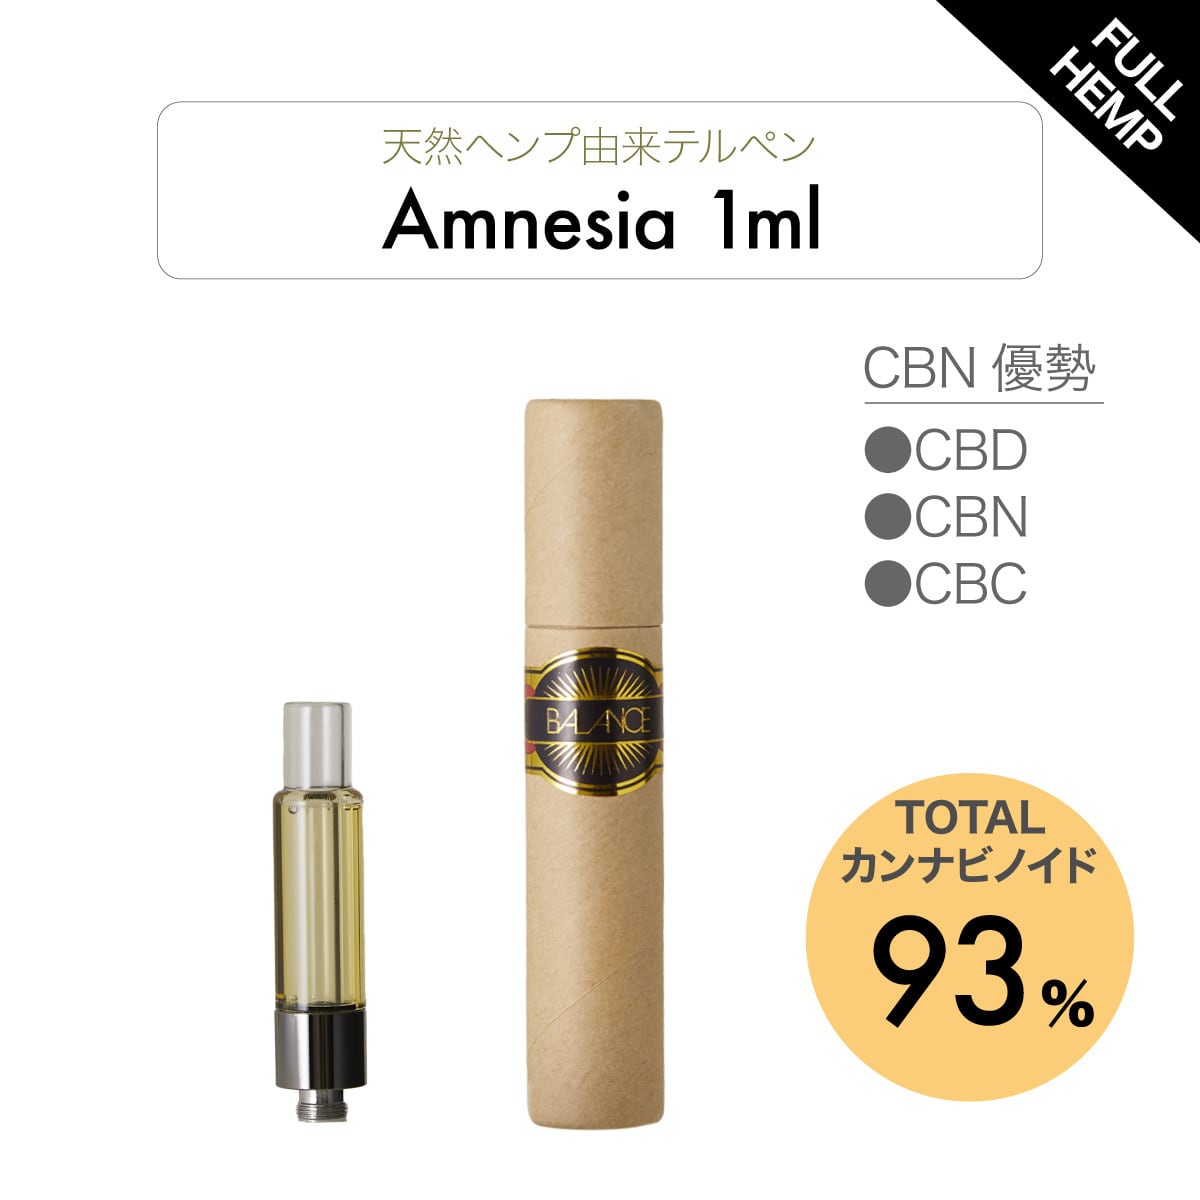 crdpリキッド15% 1ml-